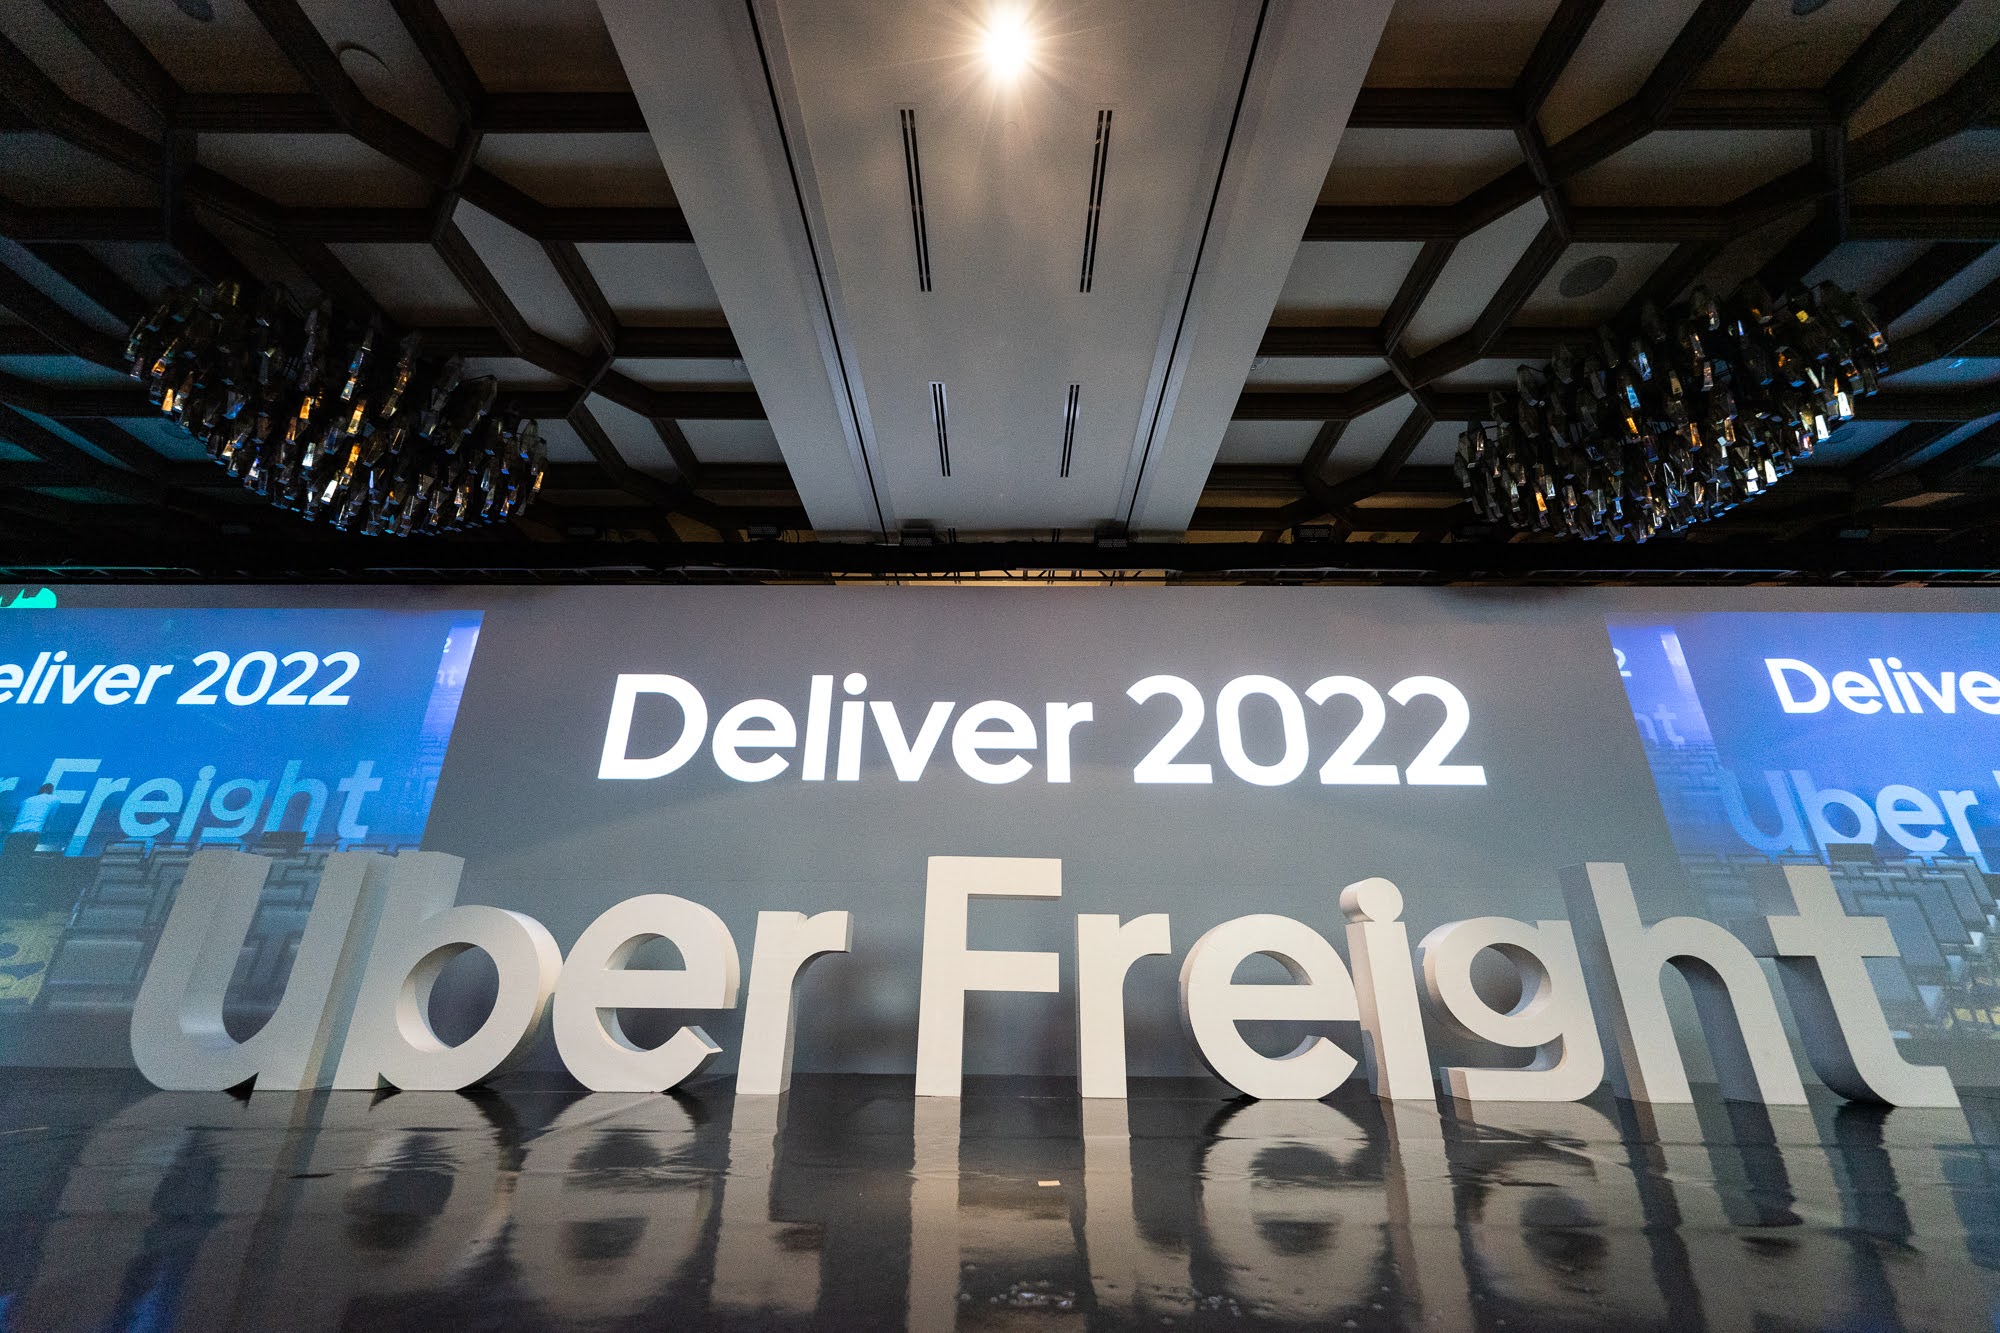 Uber Freight Deliver 2022 "A World We No Longer Live In"